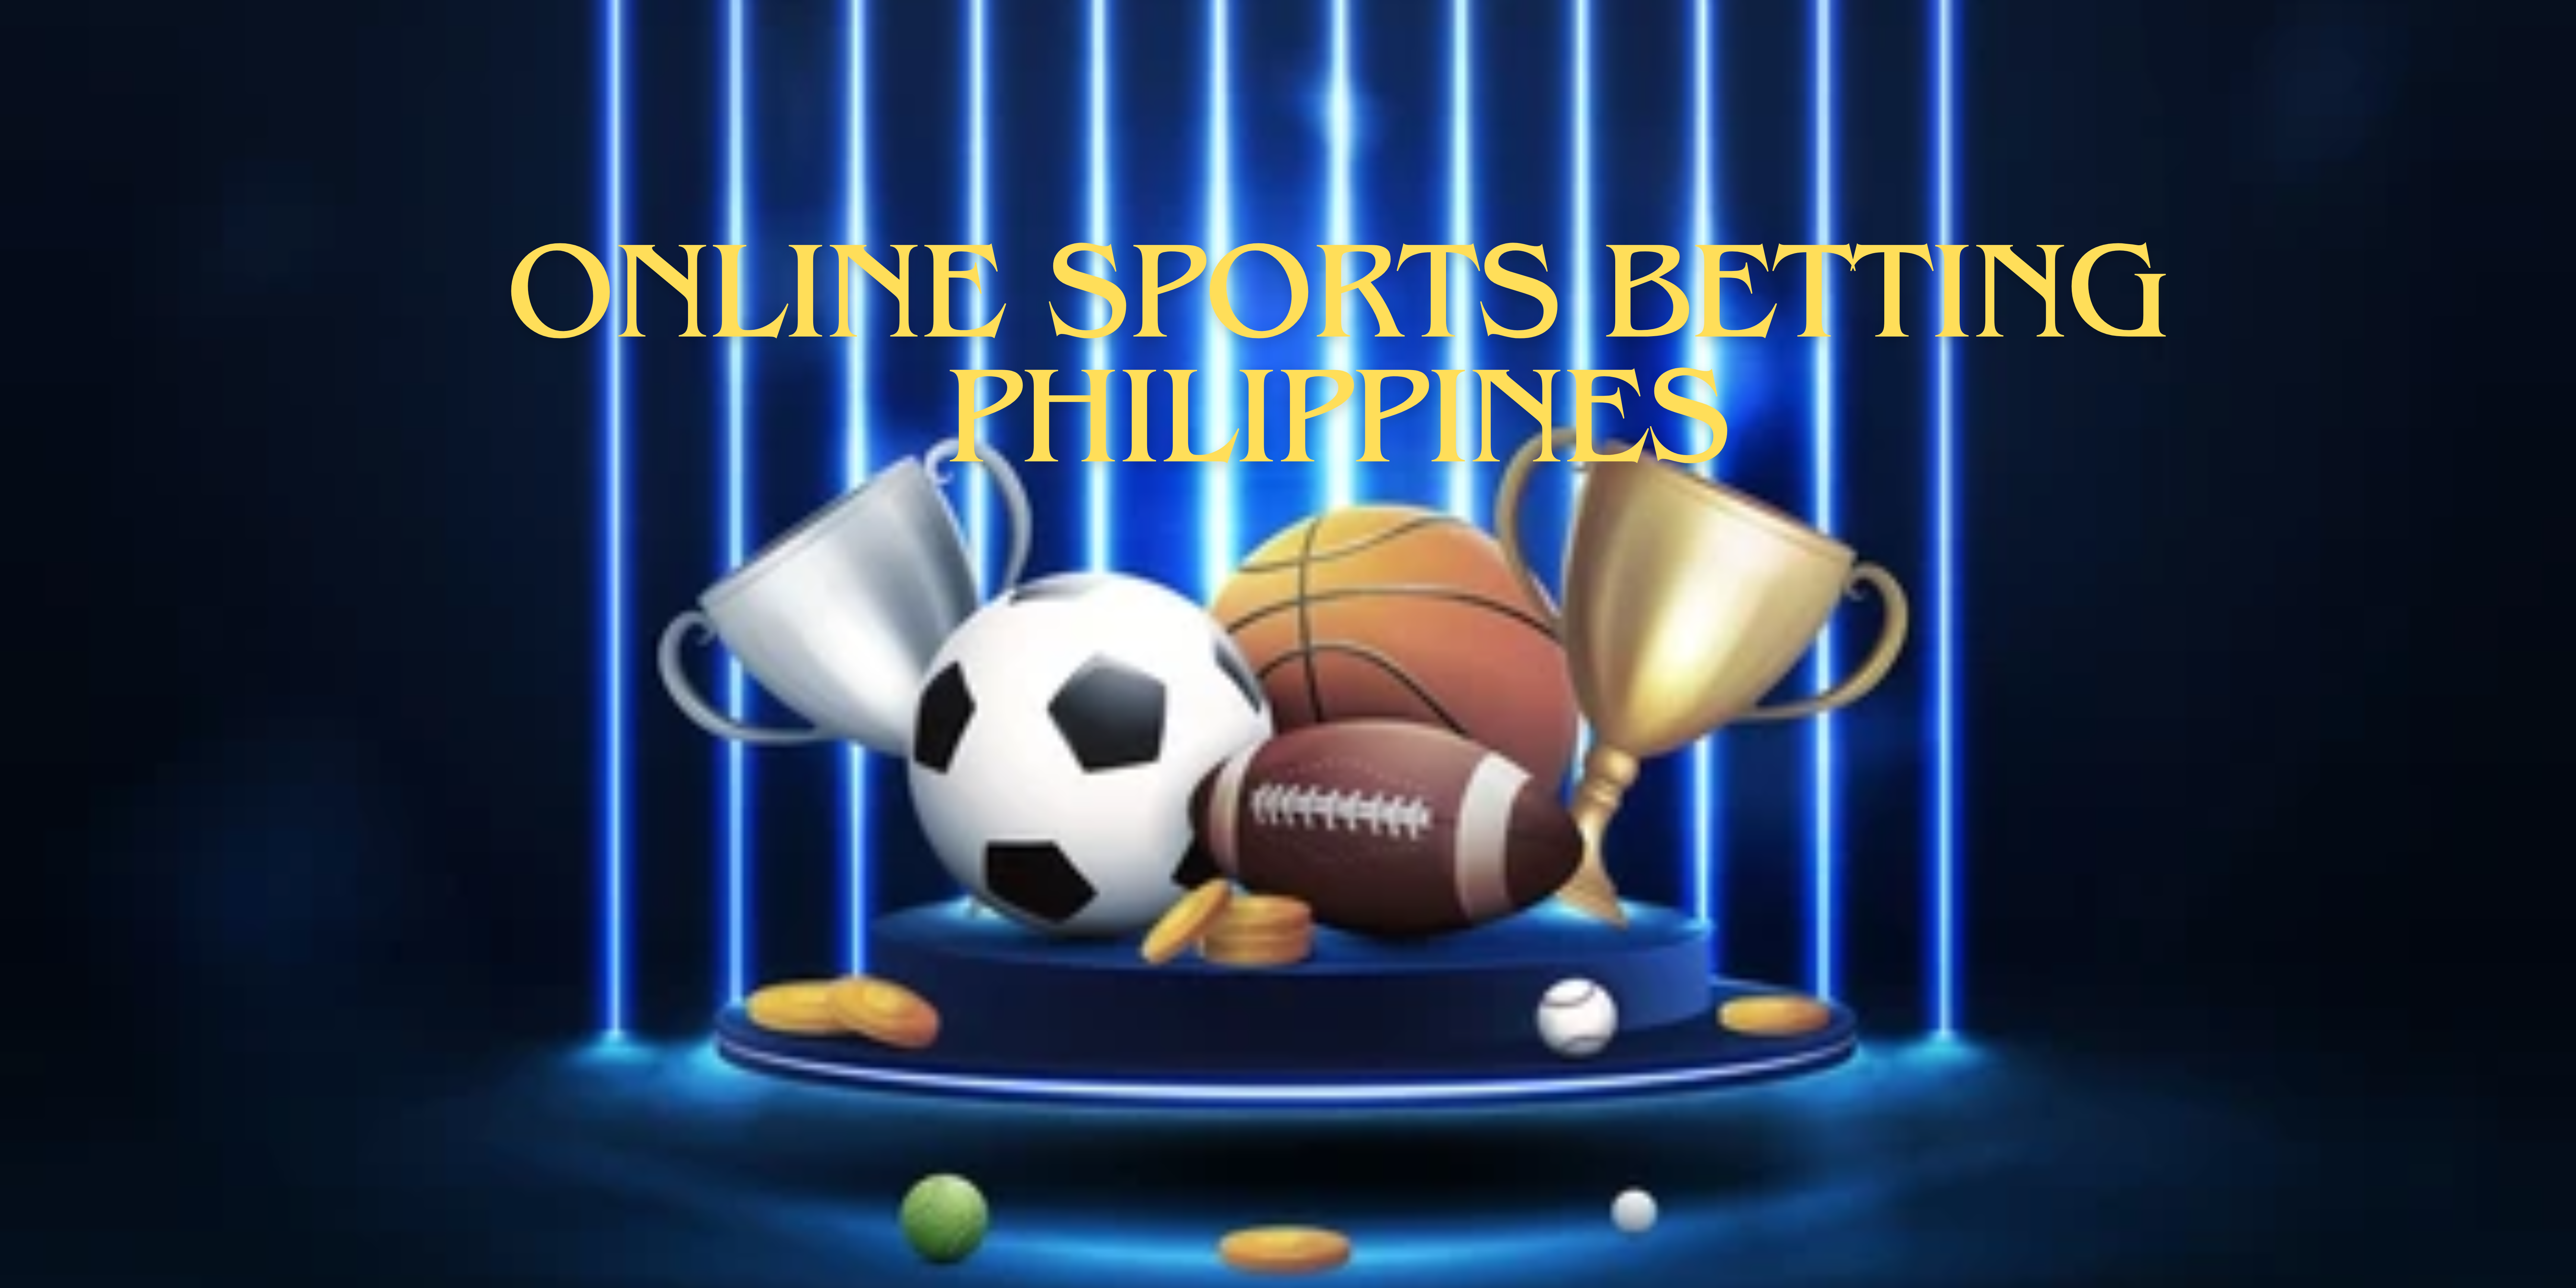 Online Sports Betting Philippines